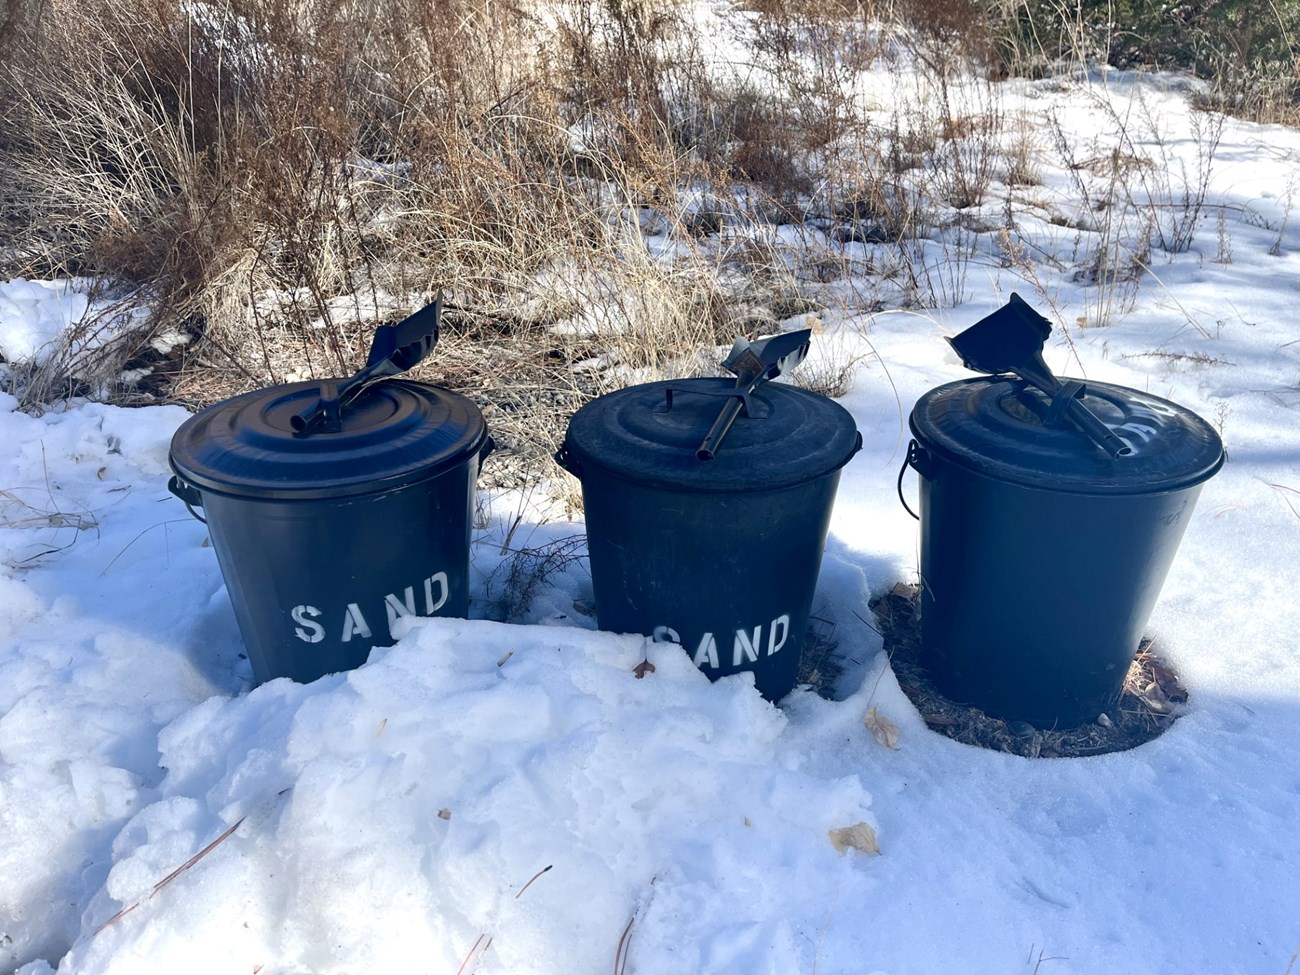 Three buckets marked "SAND" sitting in the snow.